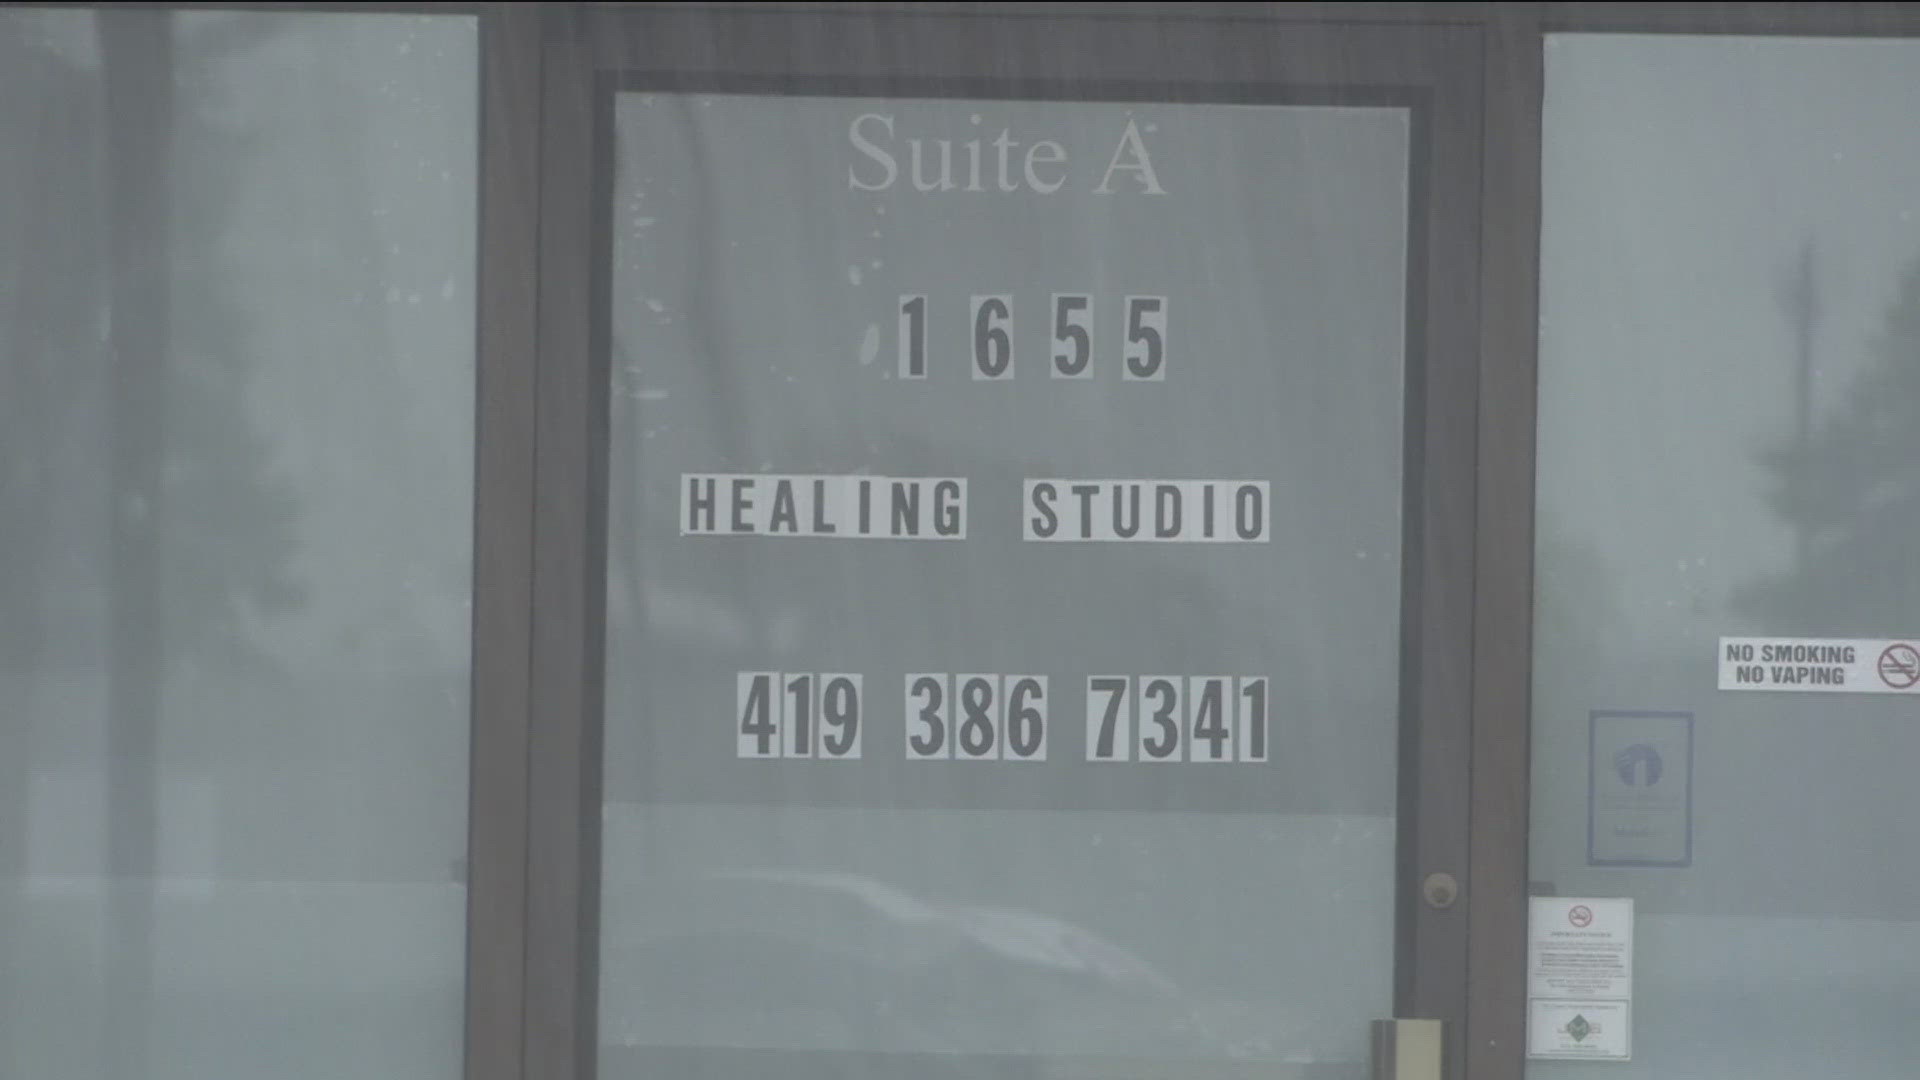 Maumee police raided a massage parlor on Holland Road on June 18. Reports said the business was being used for alleged prostitution and human trafficking.